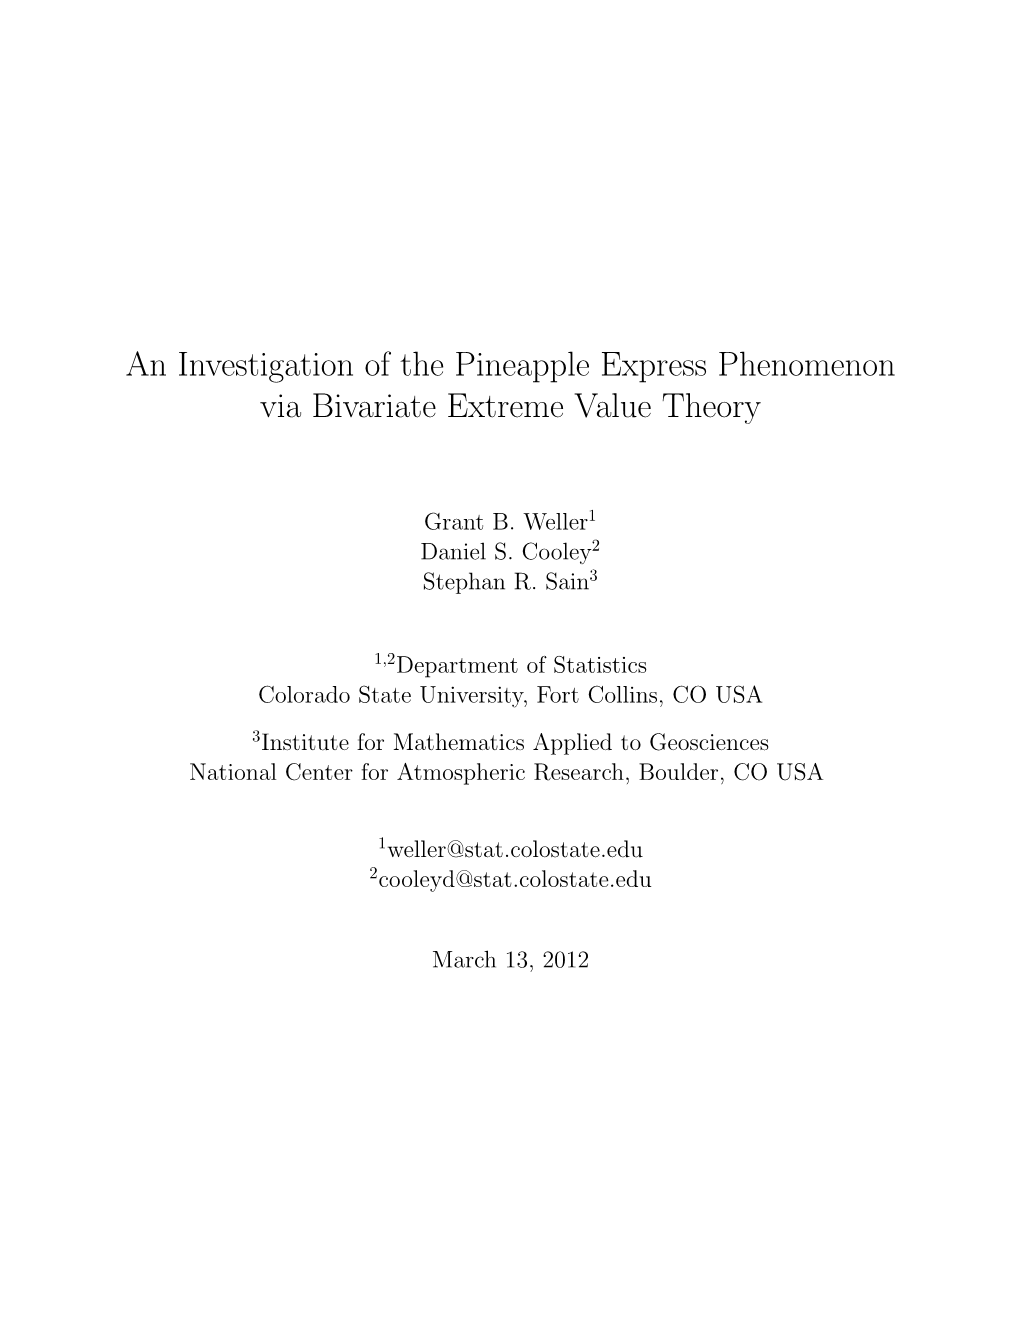 An Investigation of the Pineapple Express Phenomenon Via Bivariate Extreme Value Theory